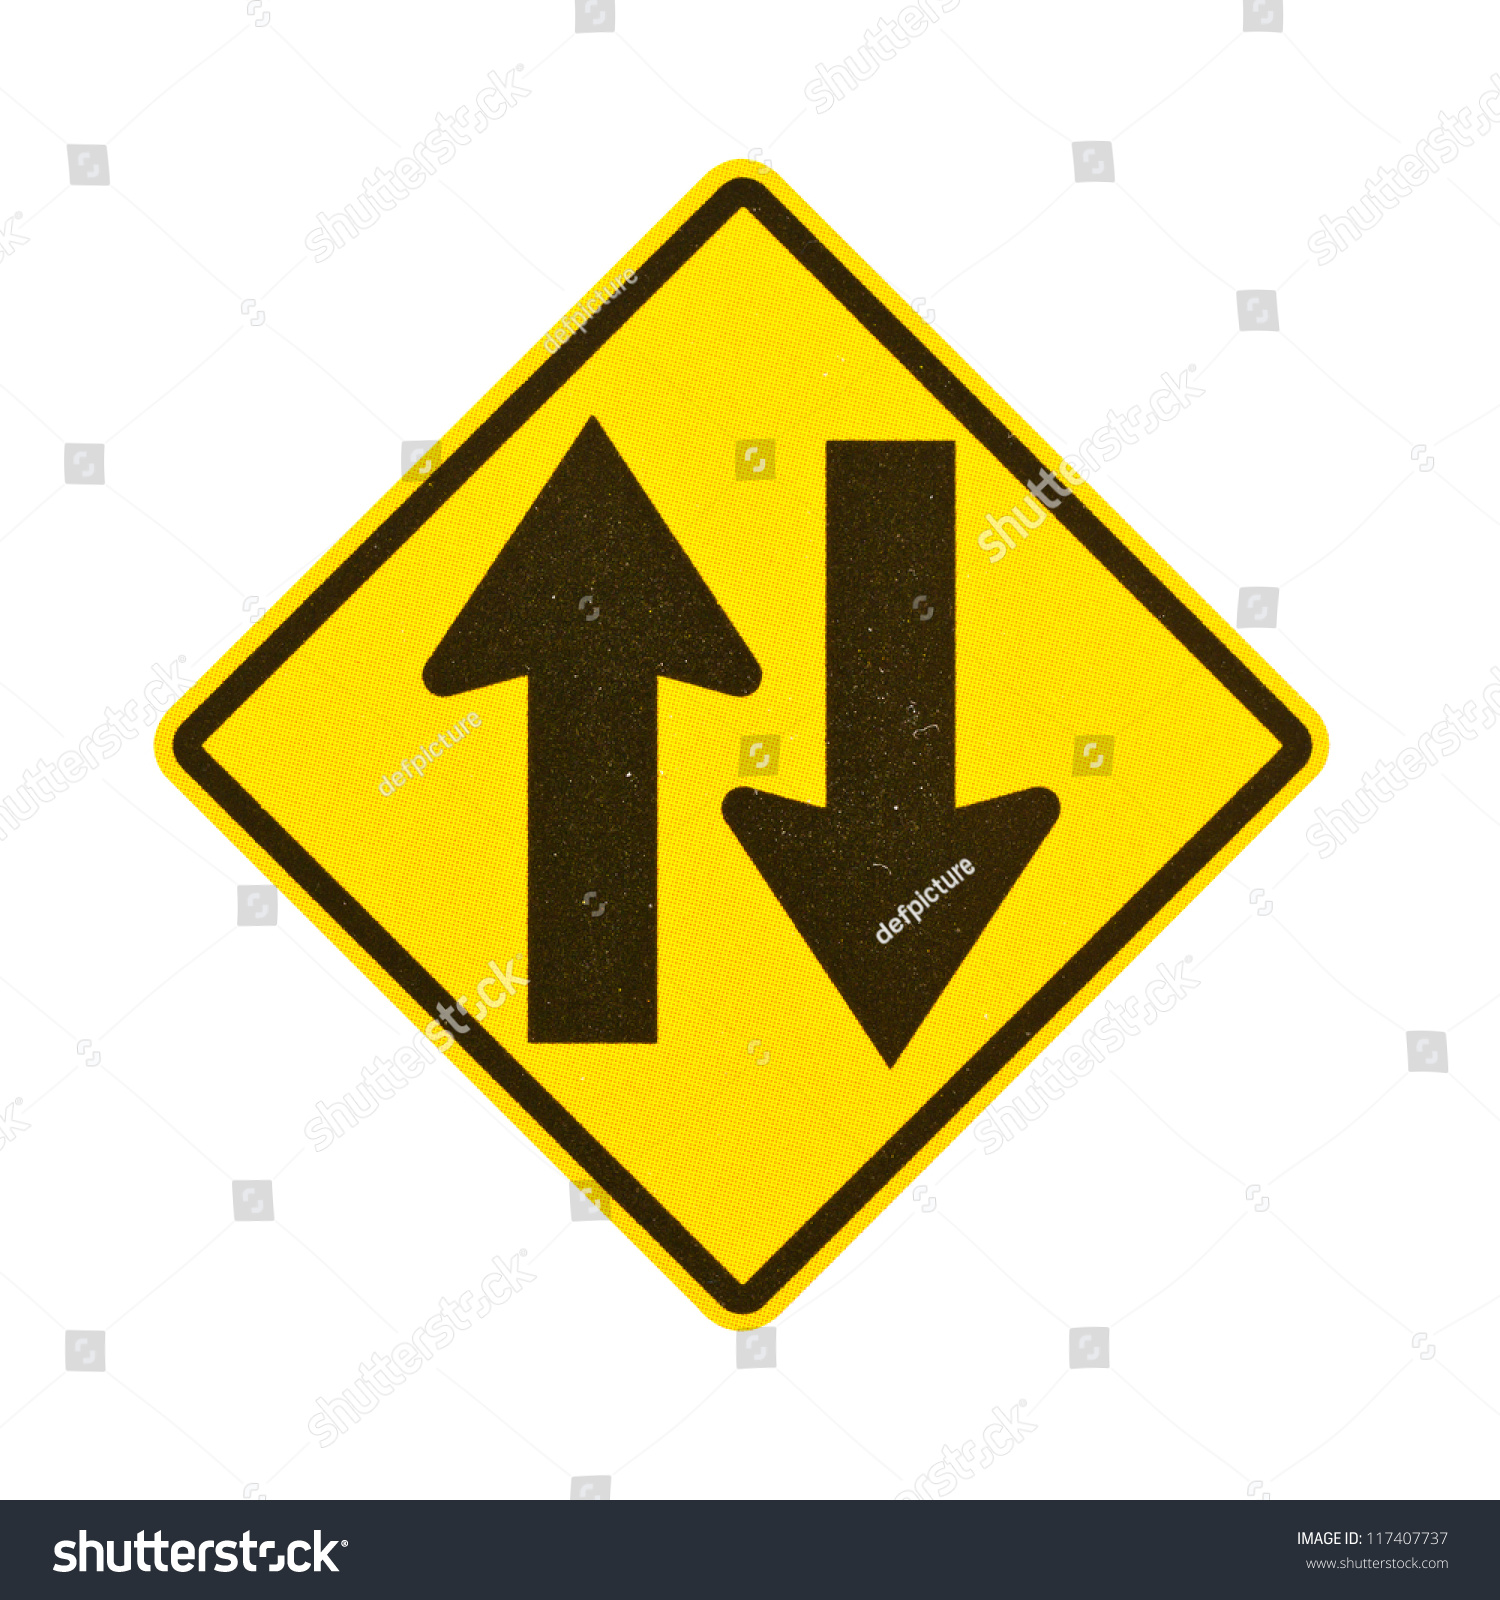 Two way traffic sign on white background with clipping path. #117407737